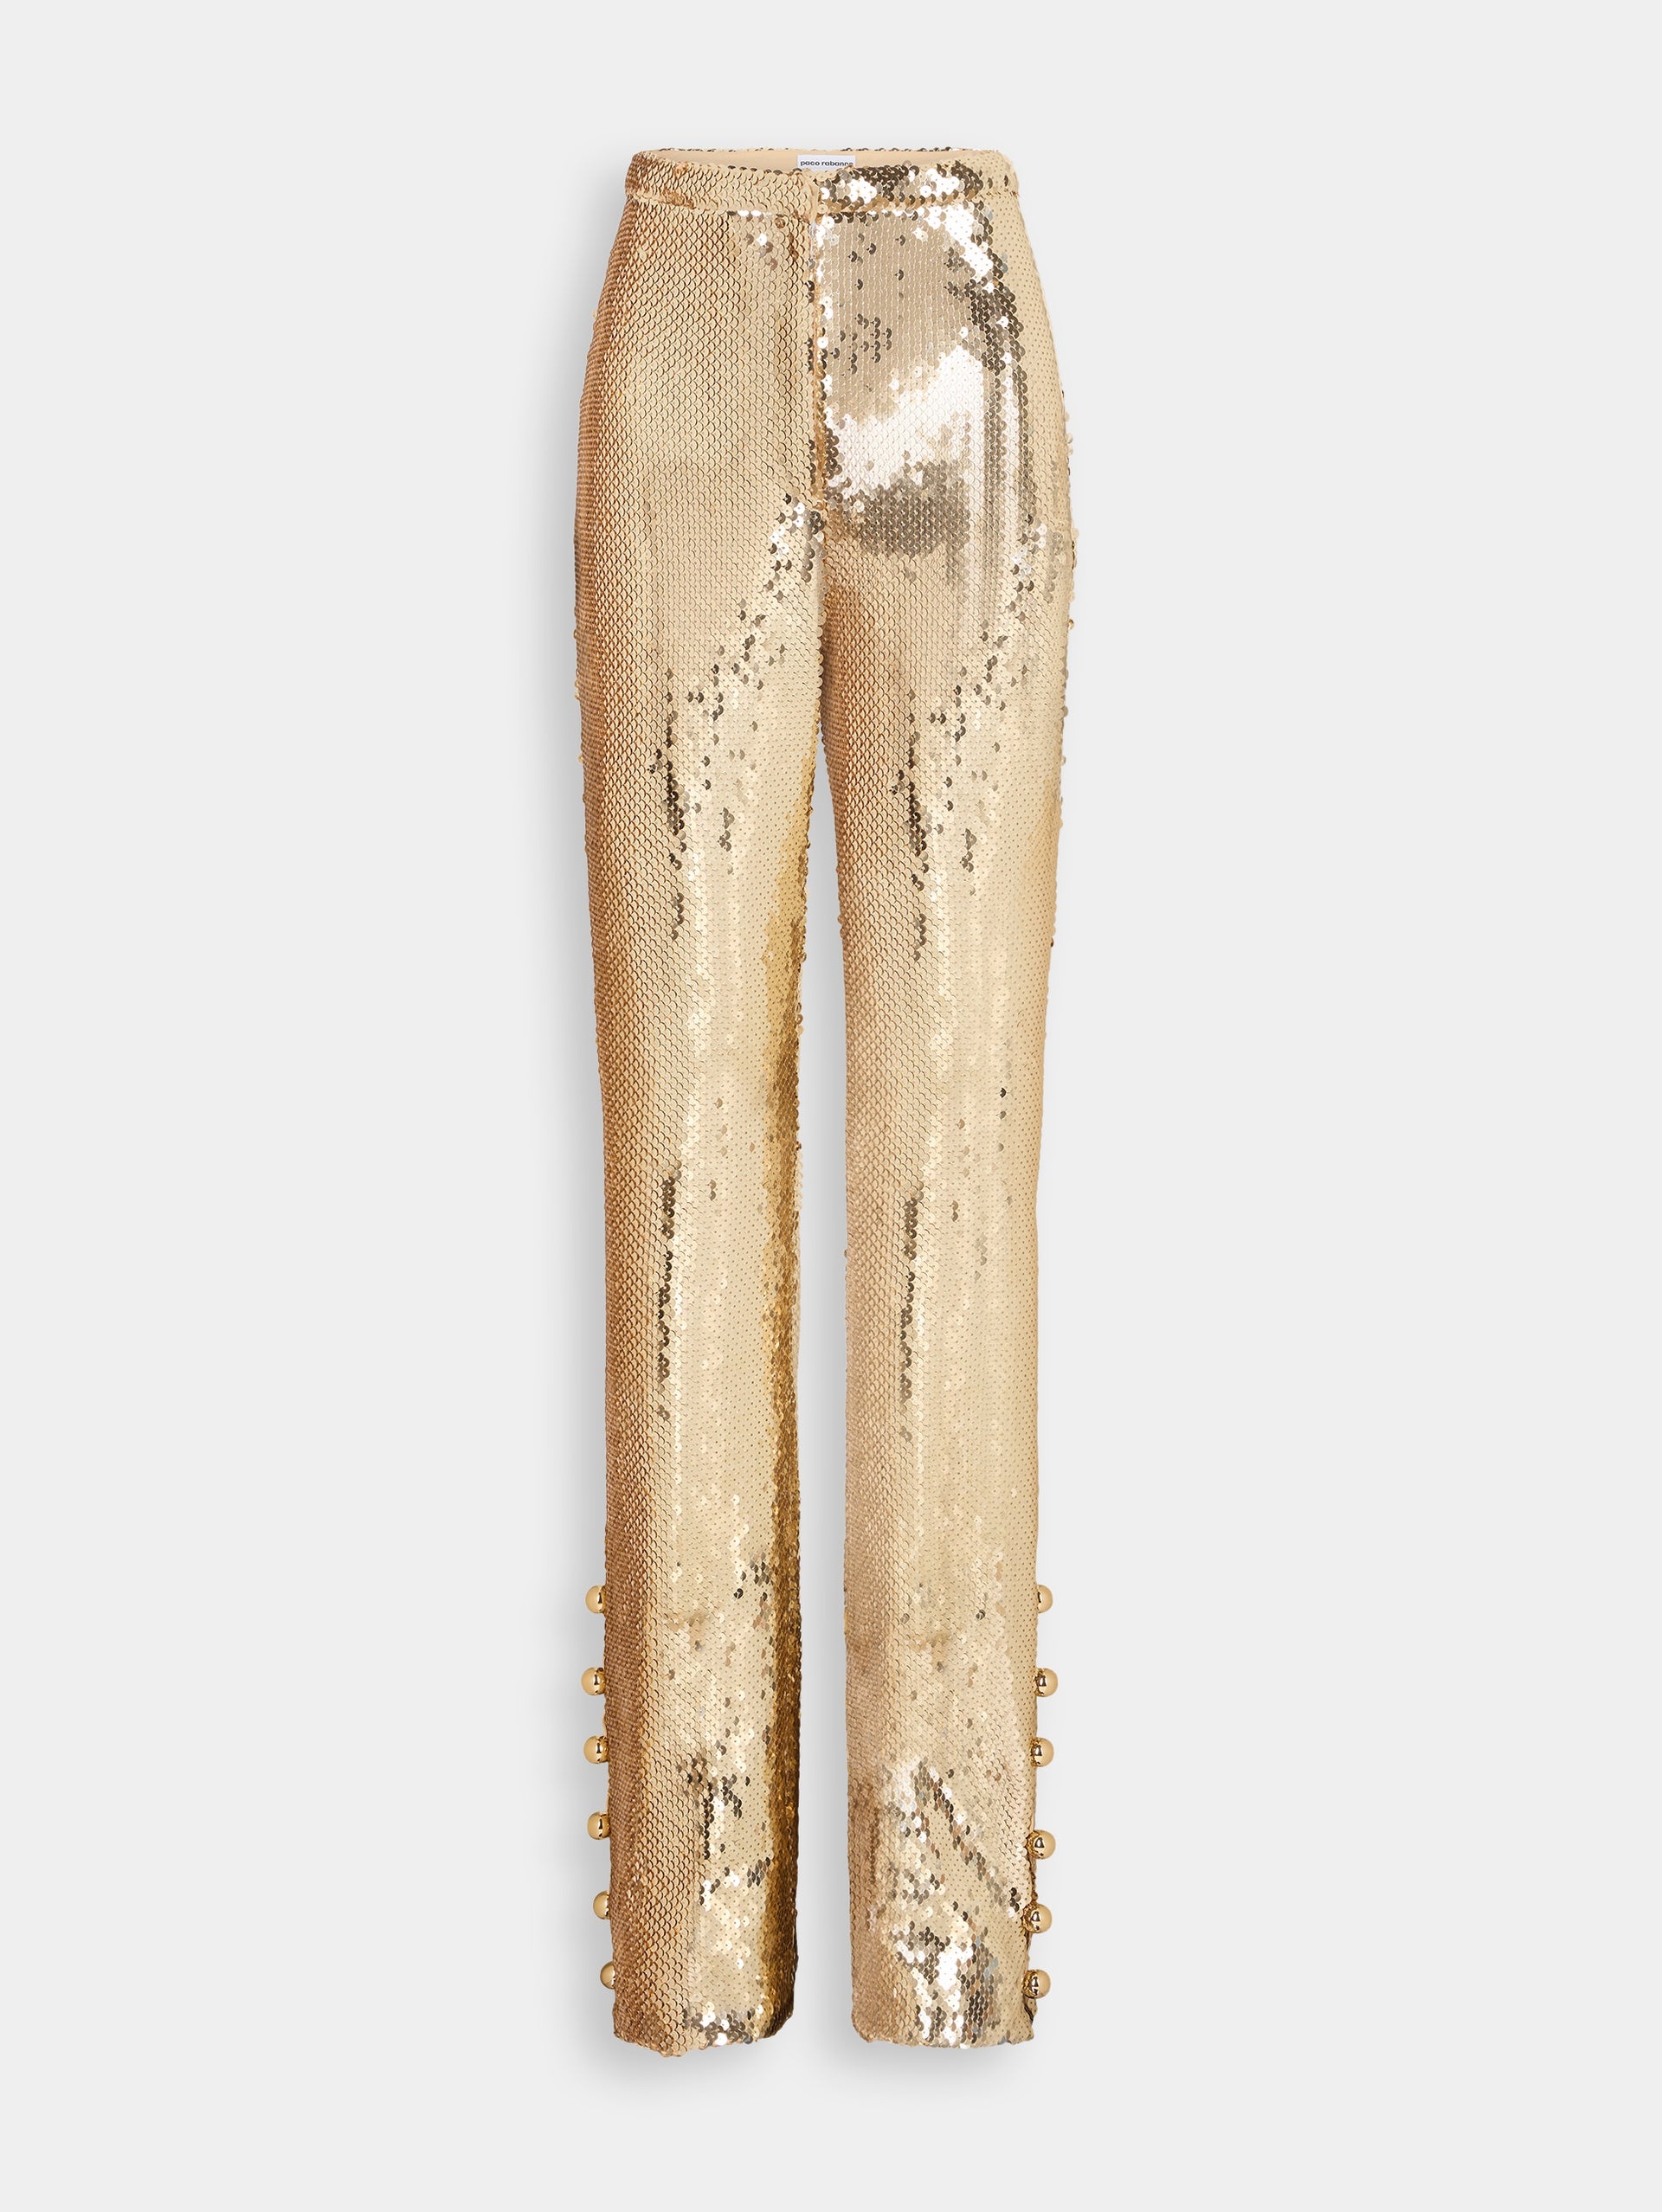 GOLD SEQUINS TROUSERS WITH METALLIC PEARLED DETAIL - 5